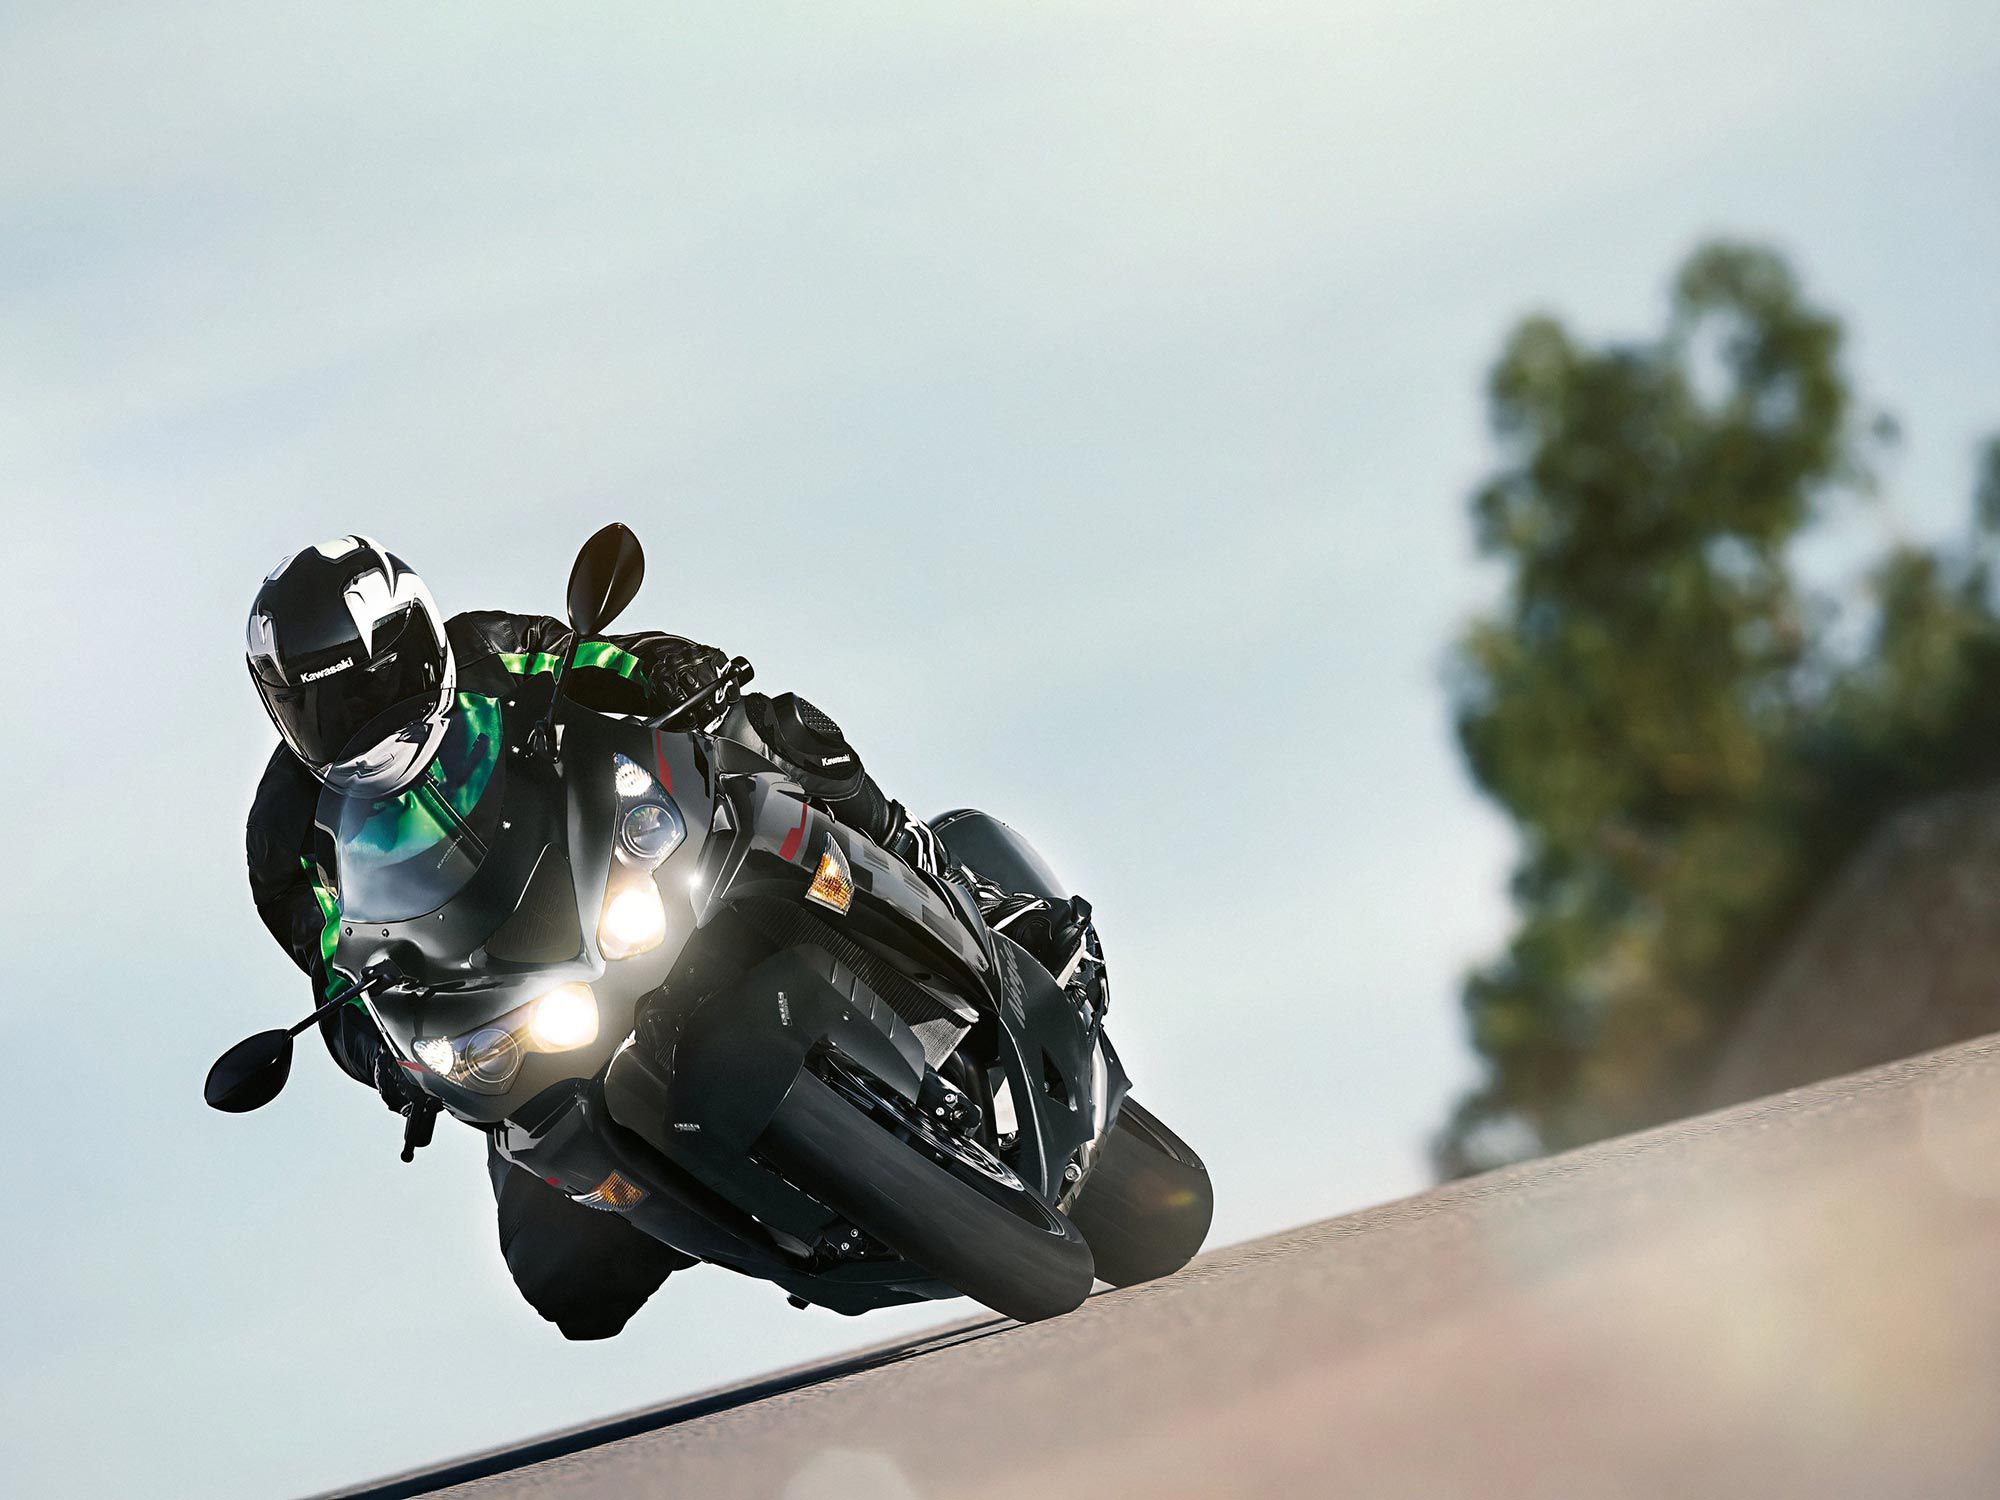 Despite its 593-pound curb weight and long 58.3-inch wheelbase, the ZX-14R handles surprisingly well.